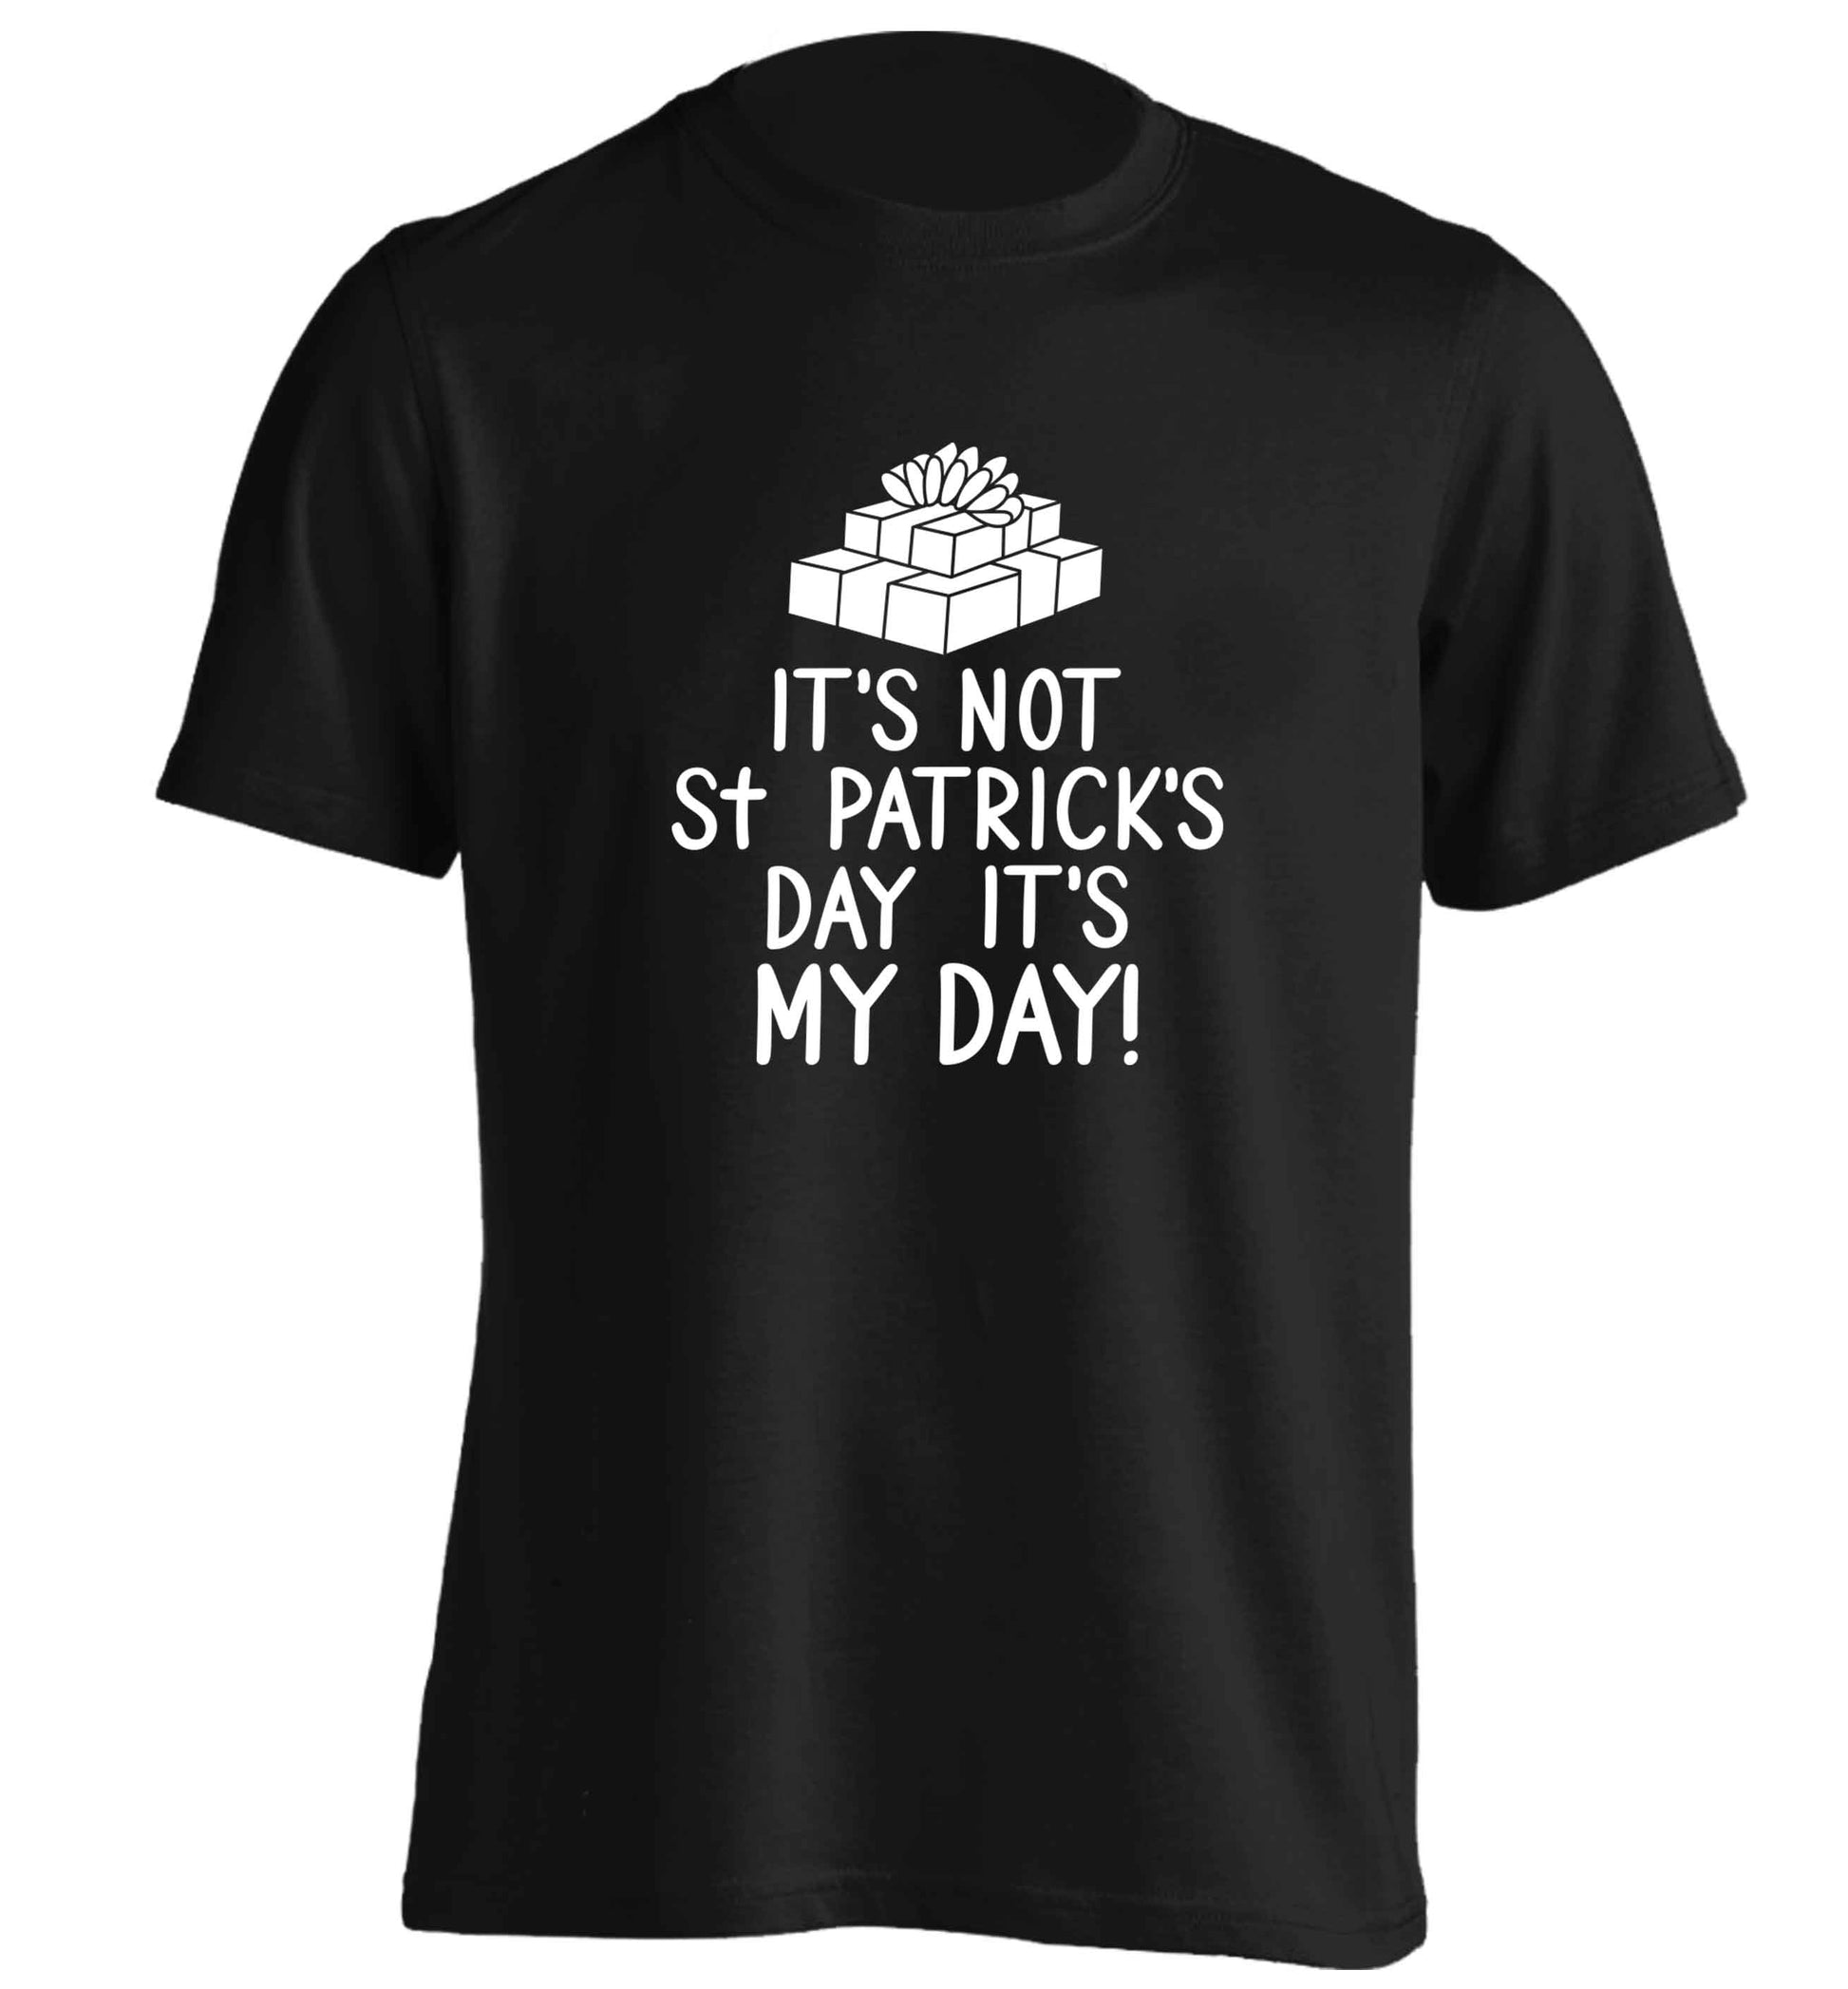 Funny gifts for your mum on mother's dayor her birthday! It's not St Patricks day it's my day adults unisex black Tshirt 2XL